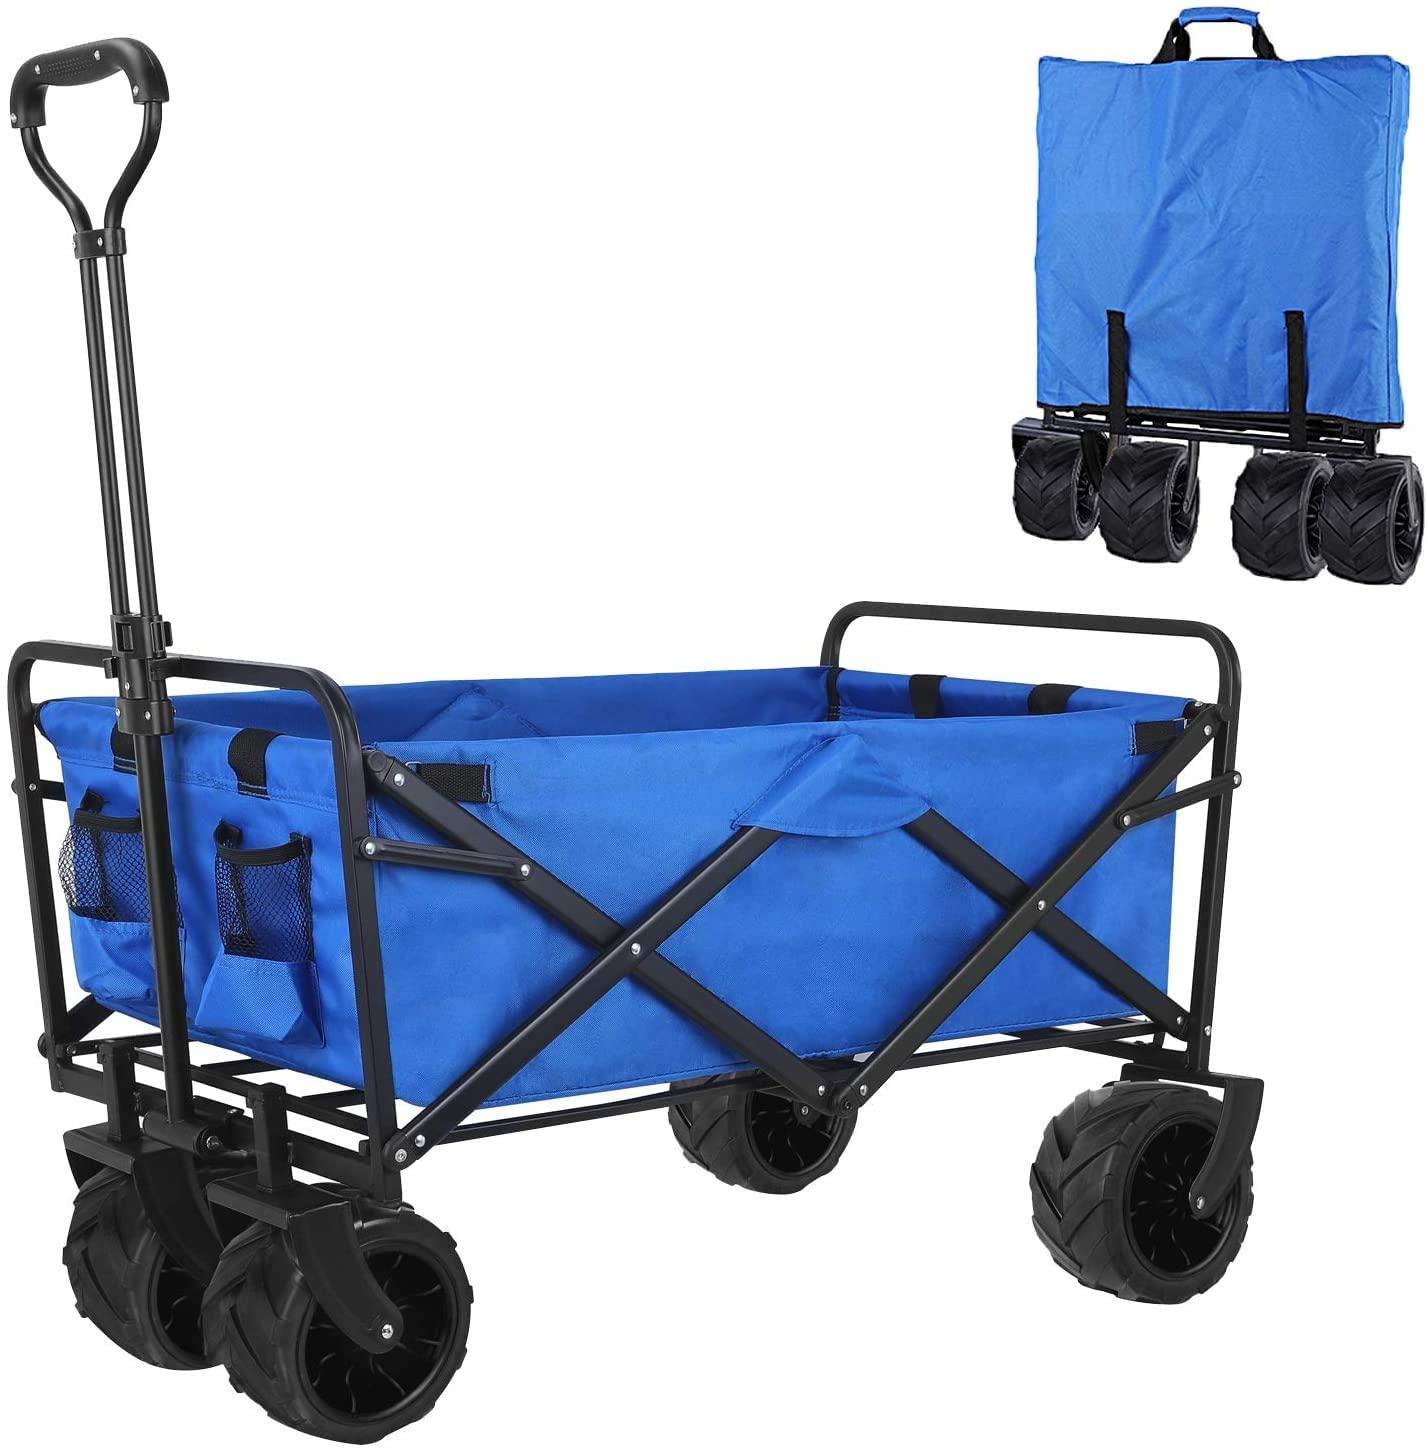 Dog Wagon open and folded in blue